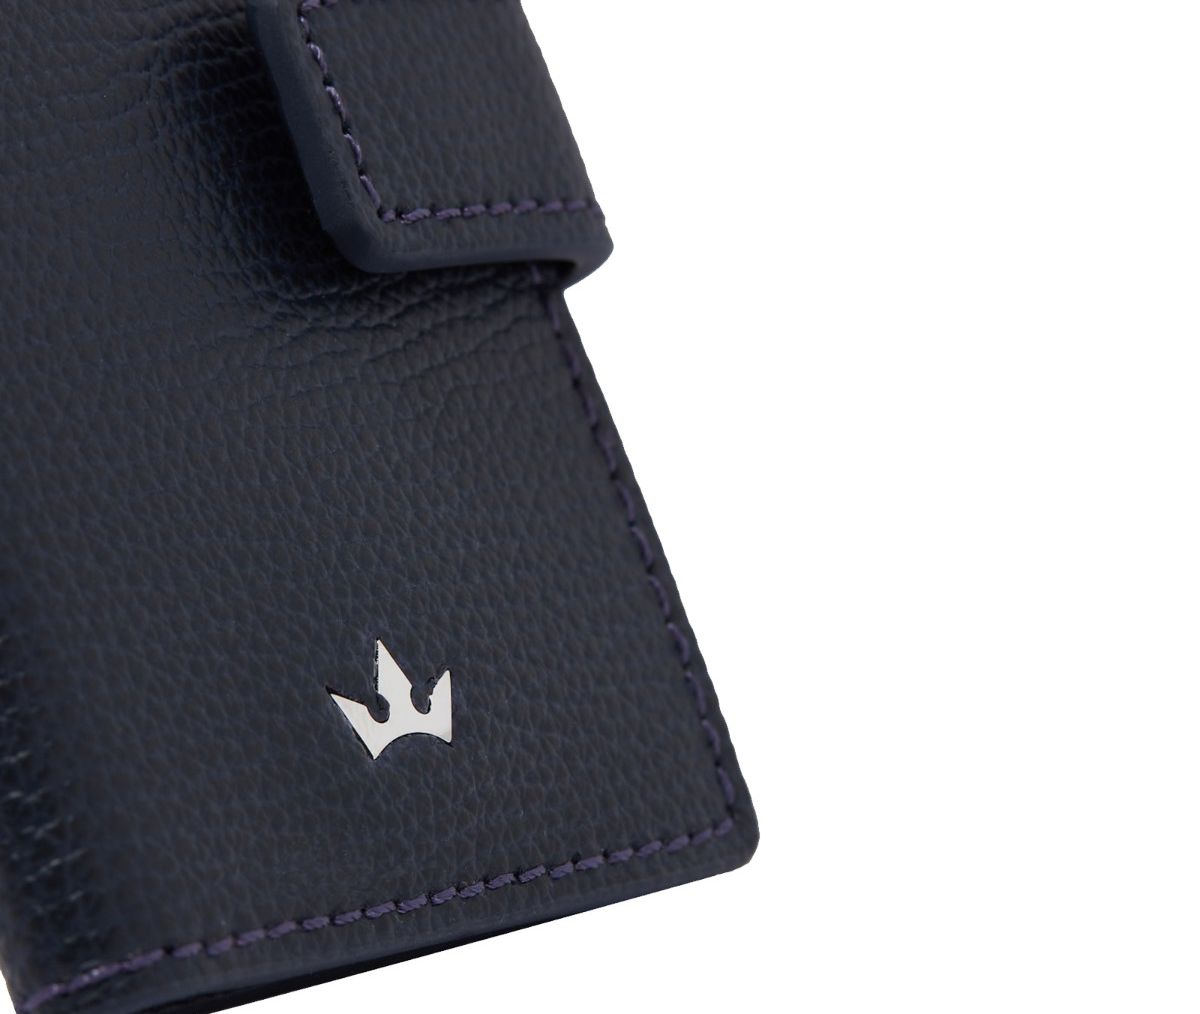 Award Clip Card Holder - Simplicity is the ultimate sophistication